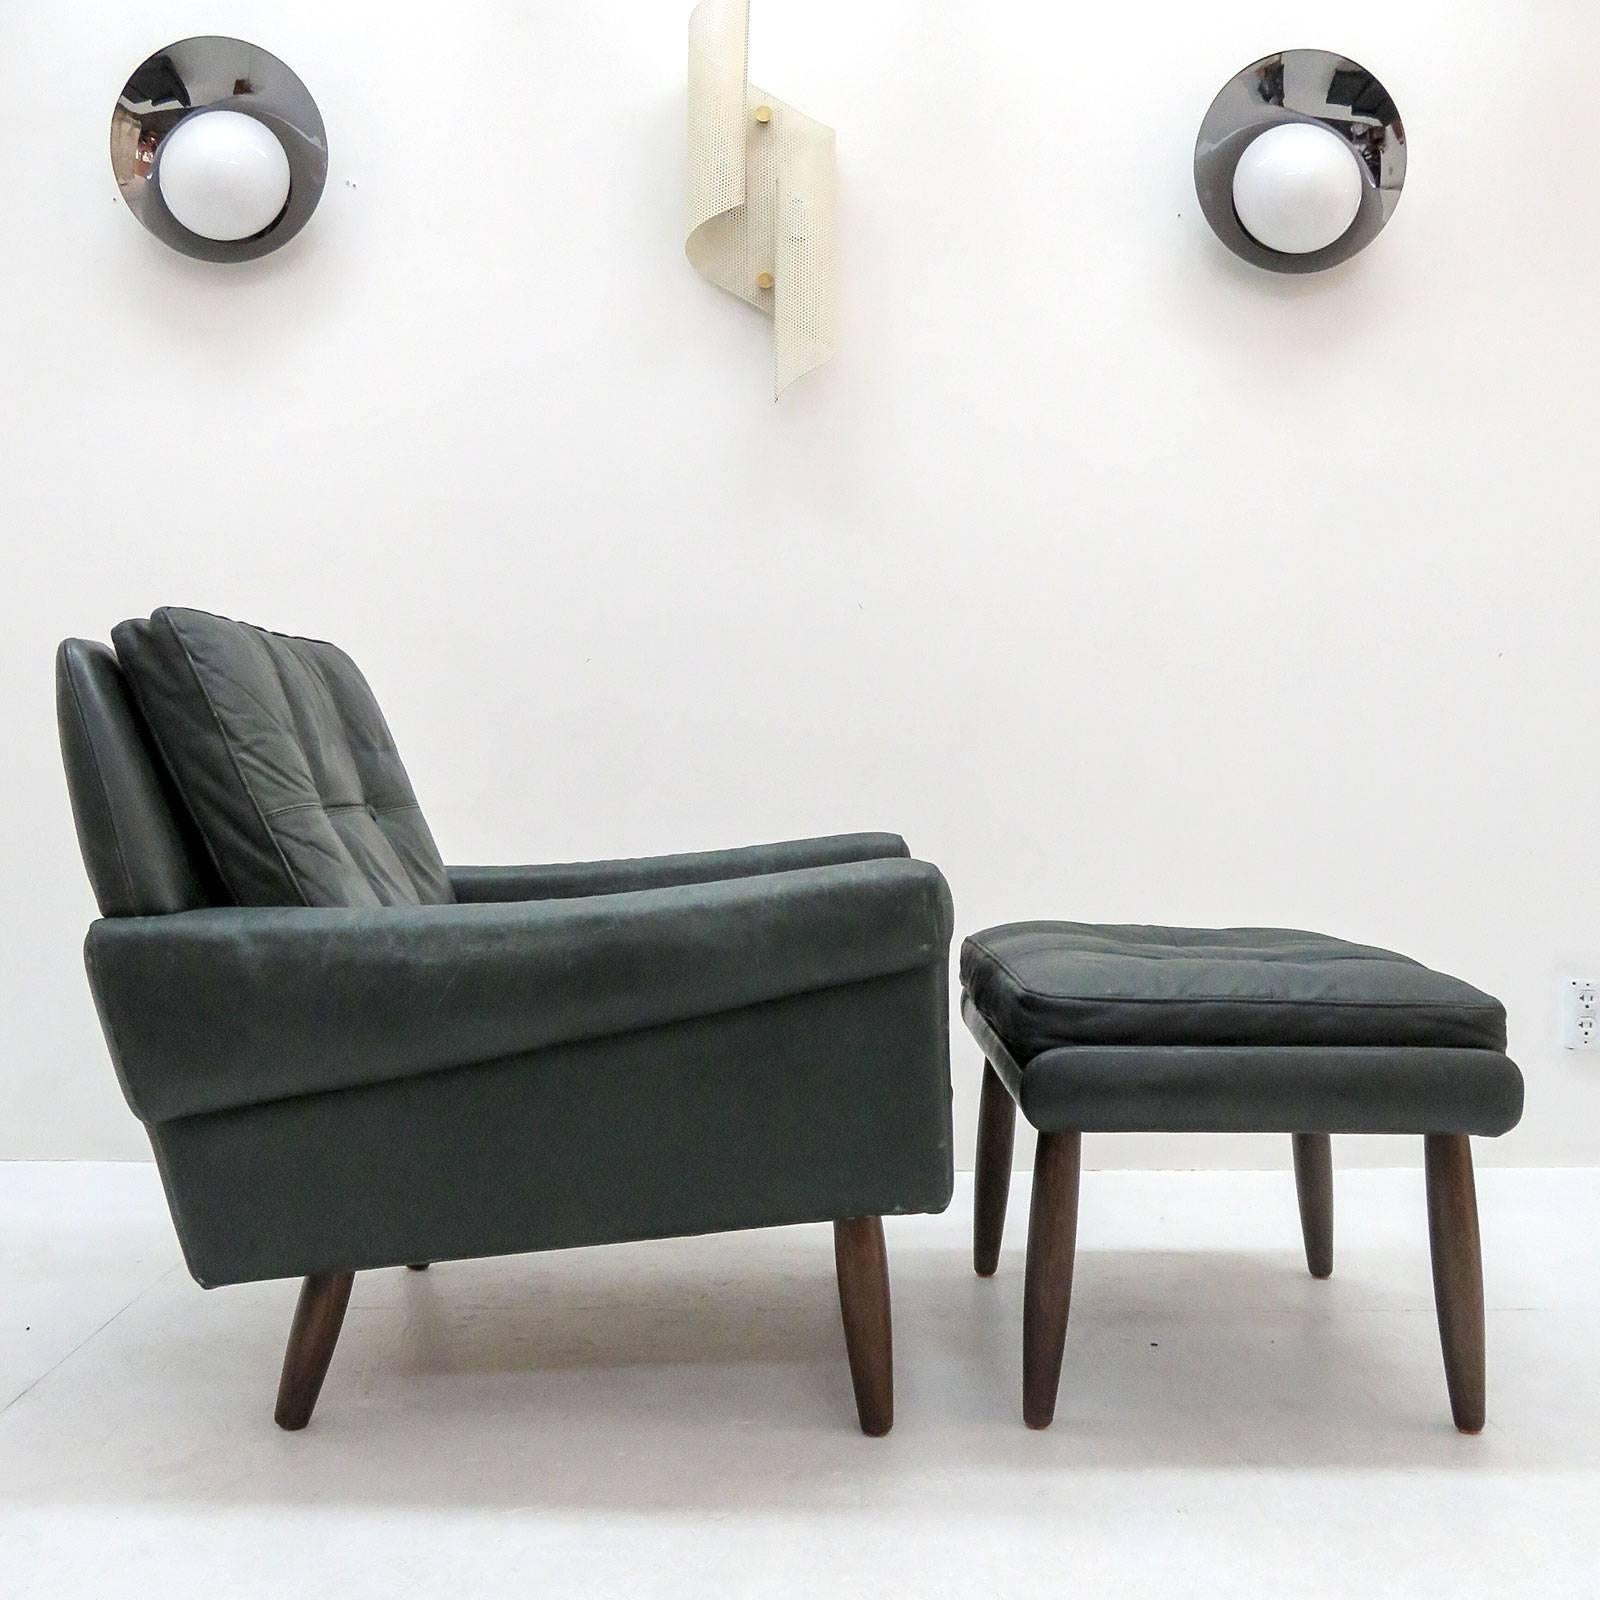 Wonderful leather armchair with ottoman by Svend Skipper, with loose cushions upholstered in buttoned patinated dark green leather with teak legs. Chair (H x W x D): 27.5 x 29.5 x 29.5, Ottoman (H x W x D): 16.0 x 24.5 x 17.0.